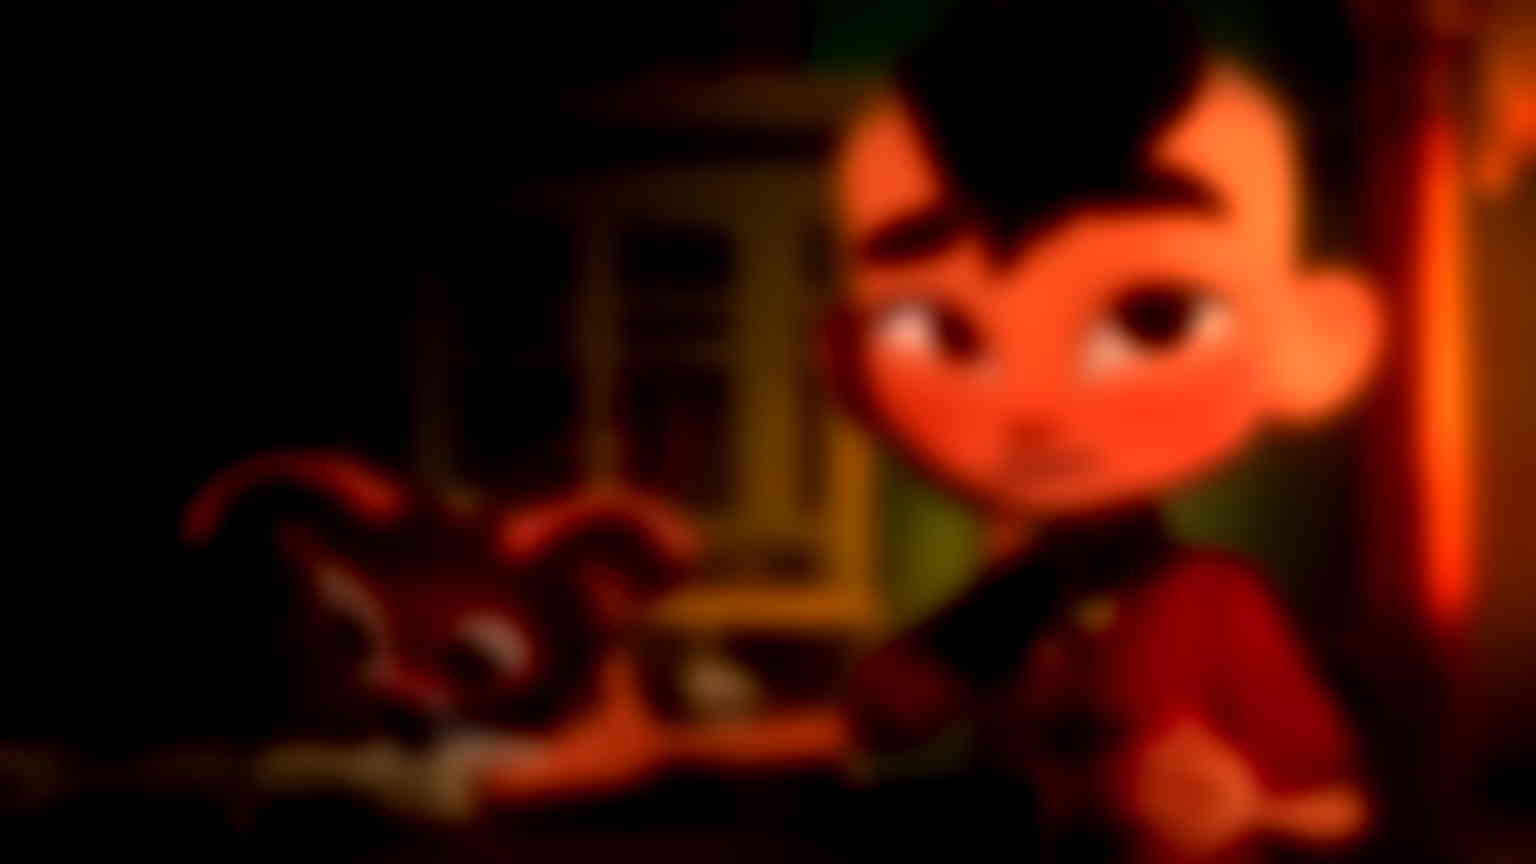 First trailer drops for ‘Gremlins’ animated prequel series set in 1920s Shanghai